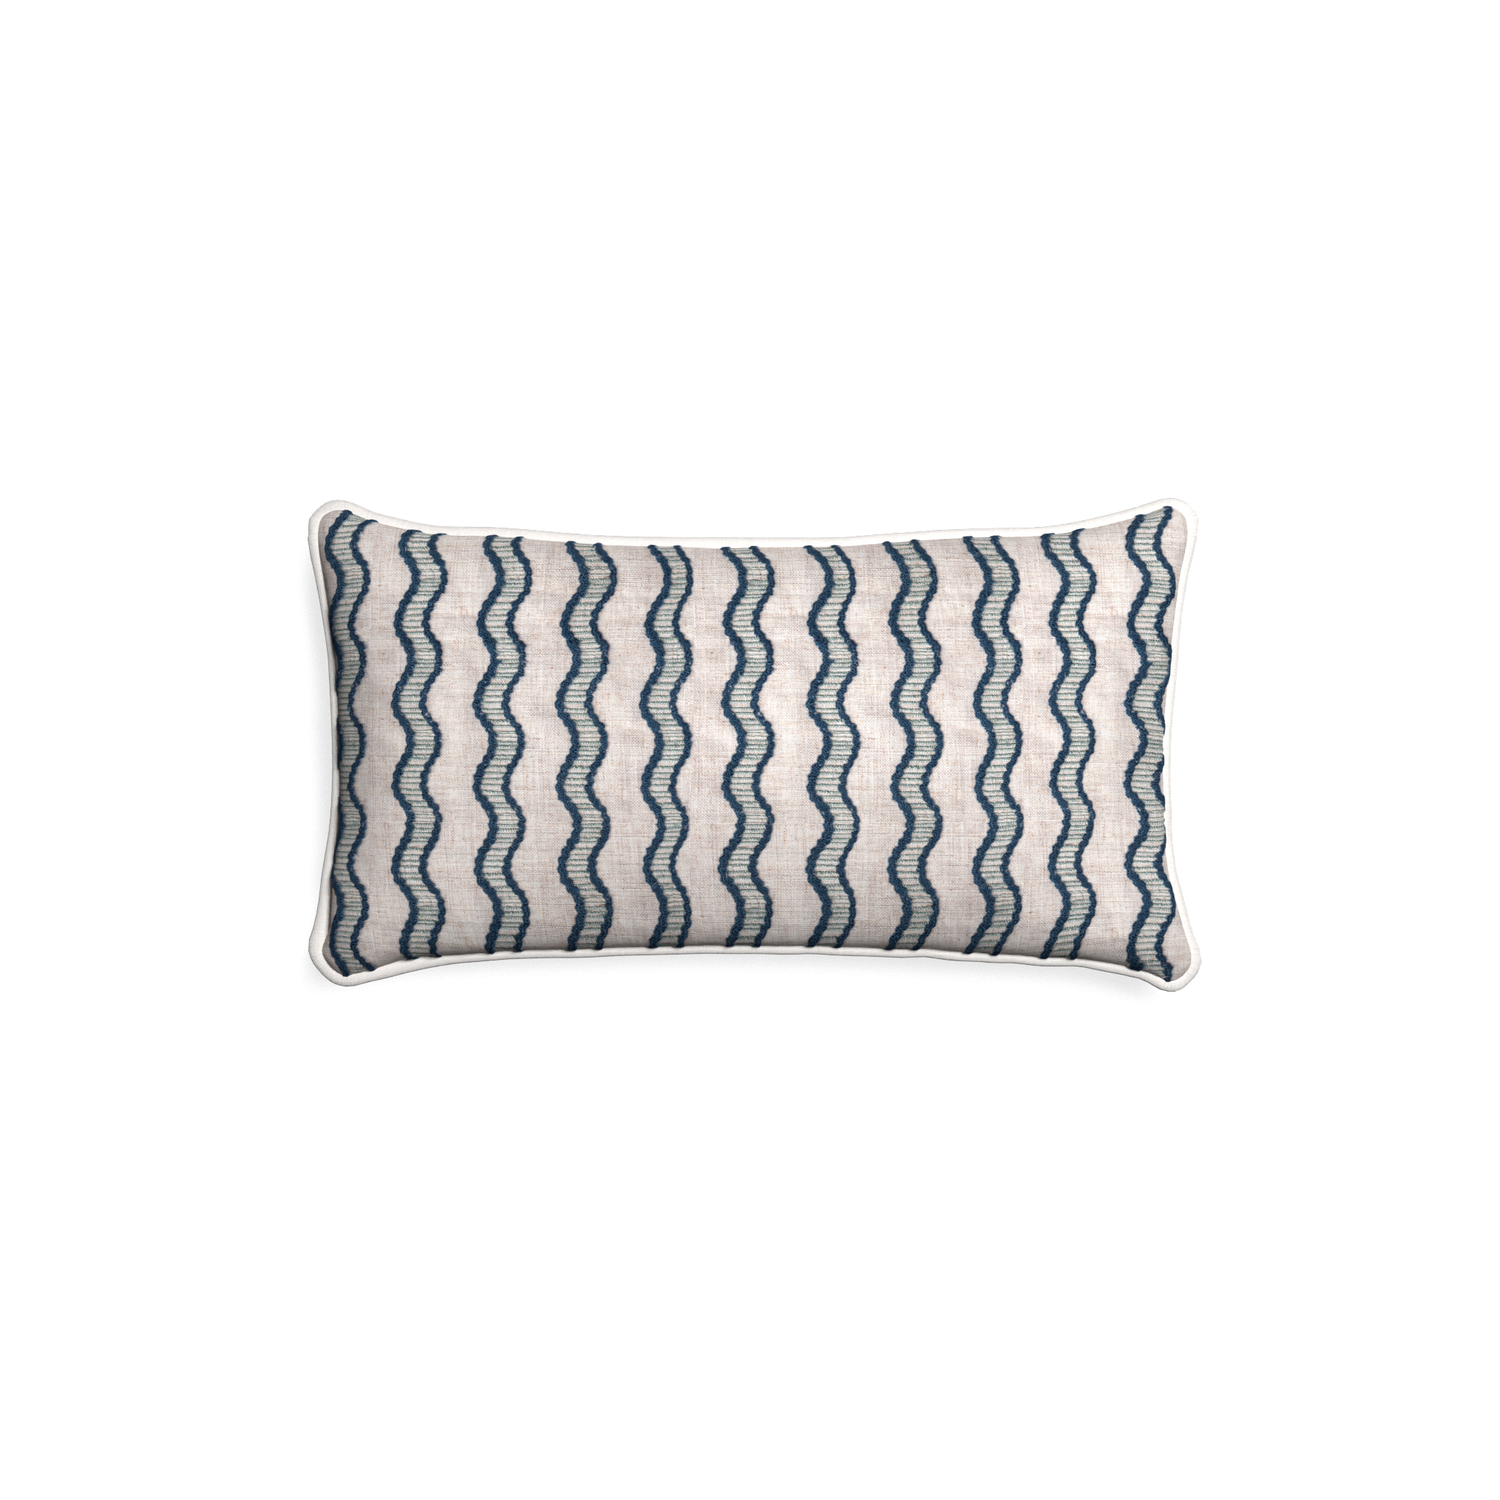 Petite-lumbar beatrice custom embroidered wavepillow with snow piping on white background